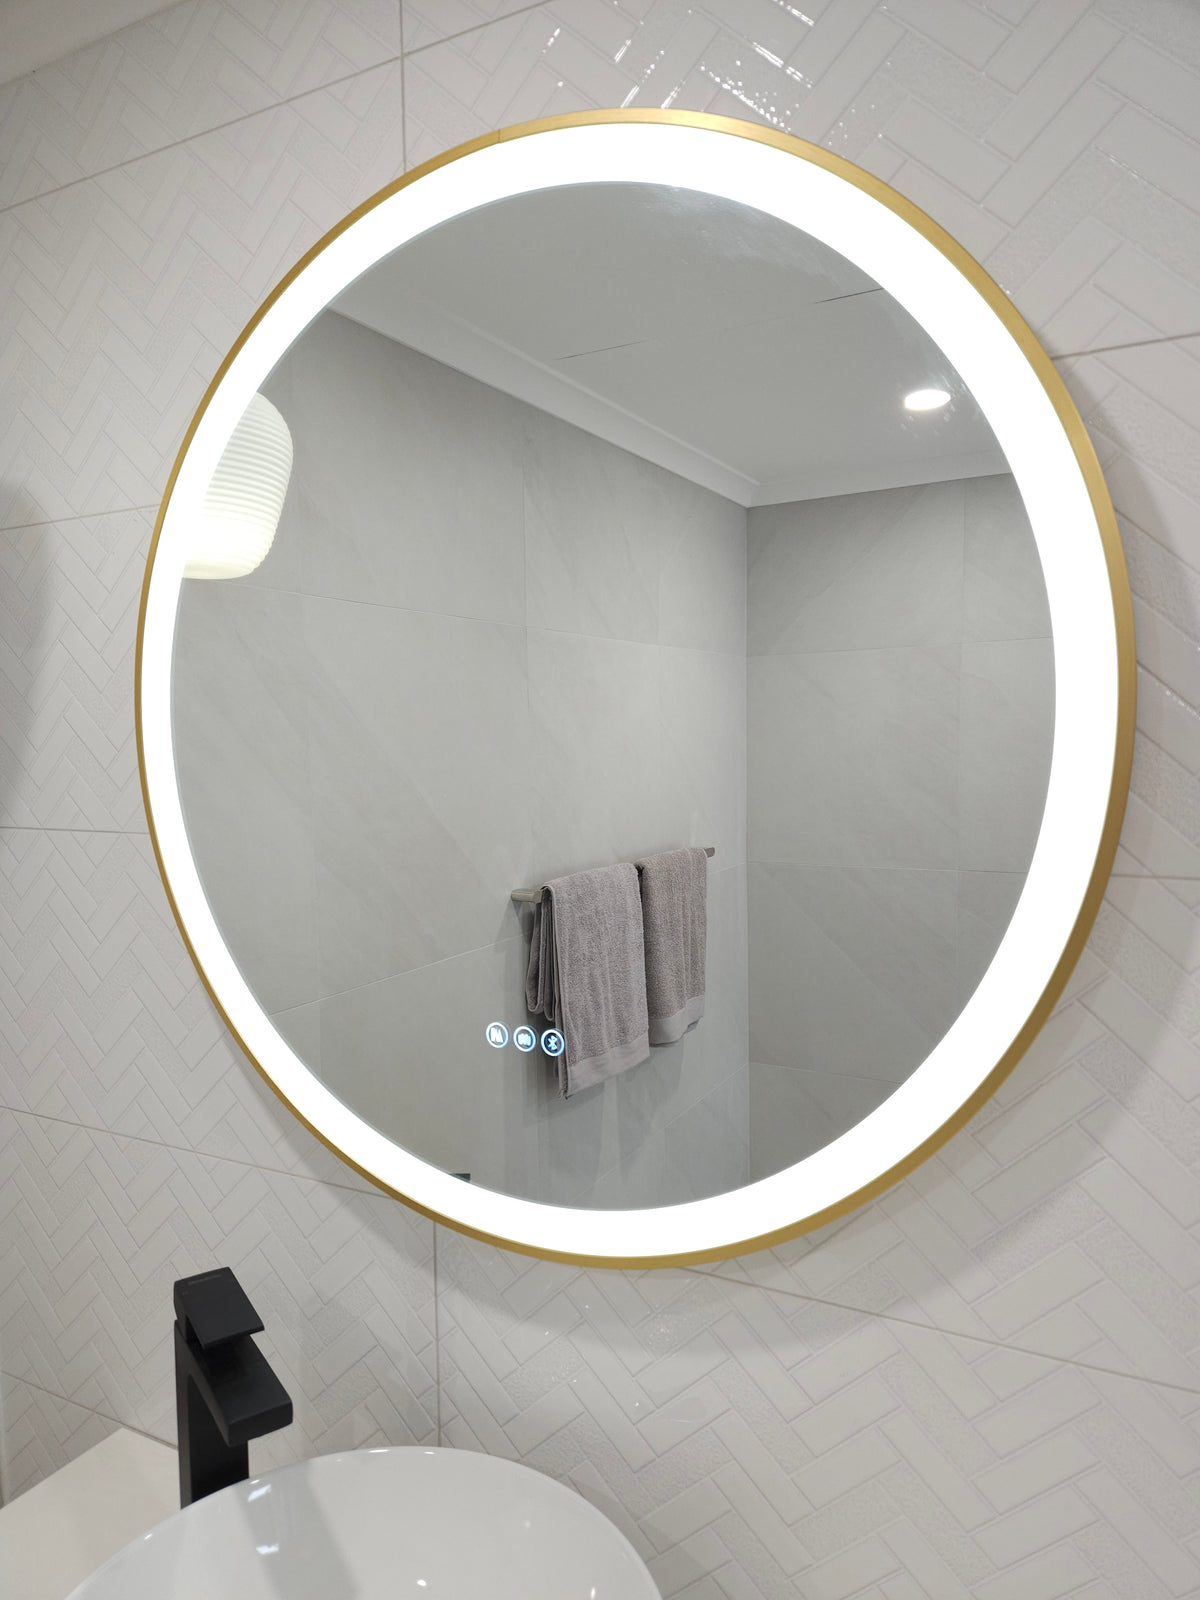 InVogue Smart LED Circle Mirror: Perspective from Door in White Powder Room